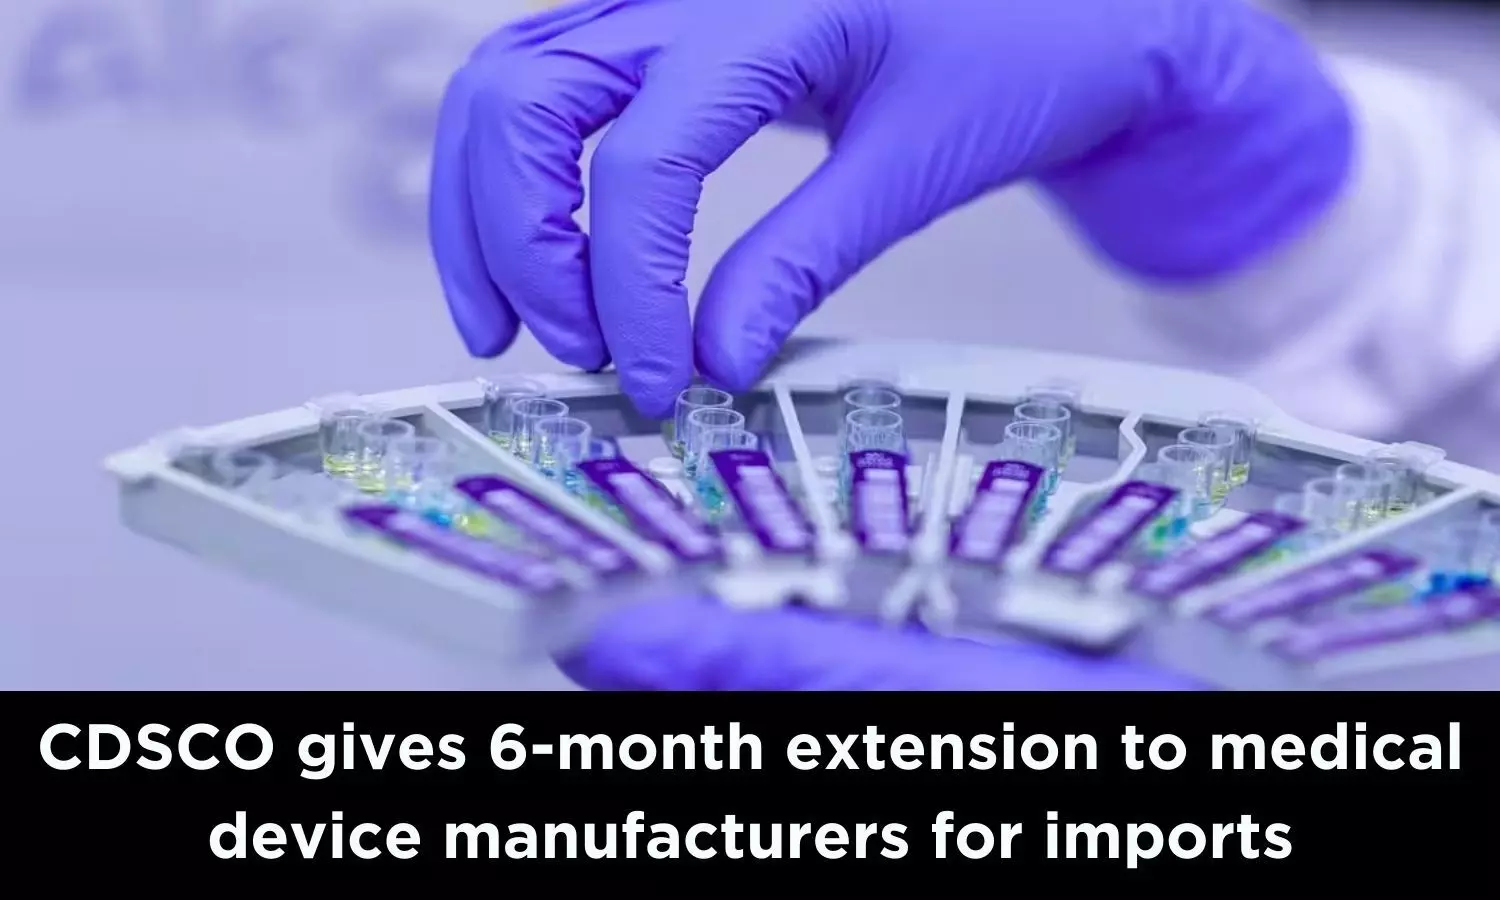 CDSCO gives 6-month extension to medical device manufacturers for imports